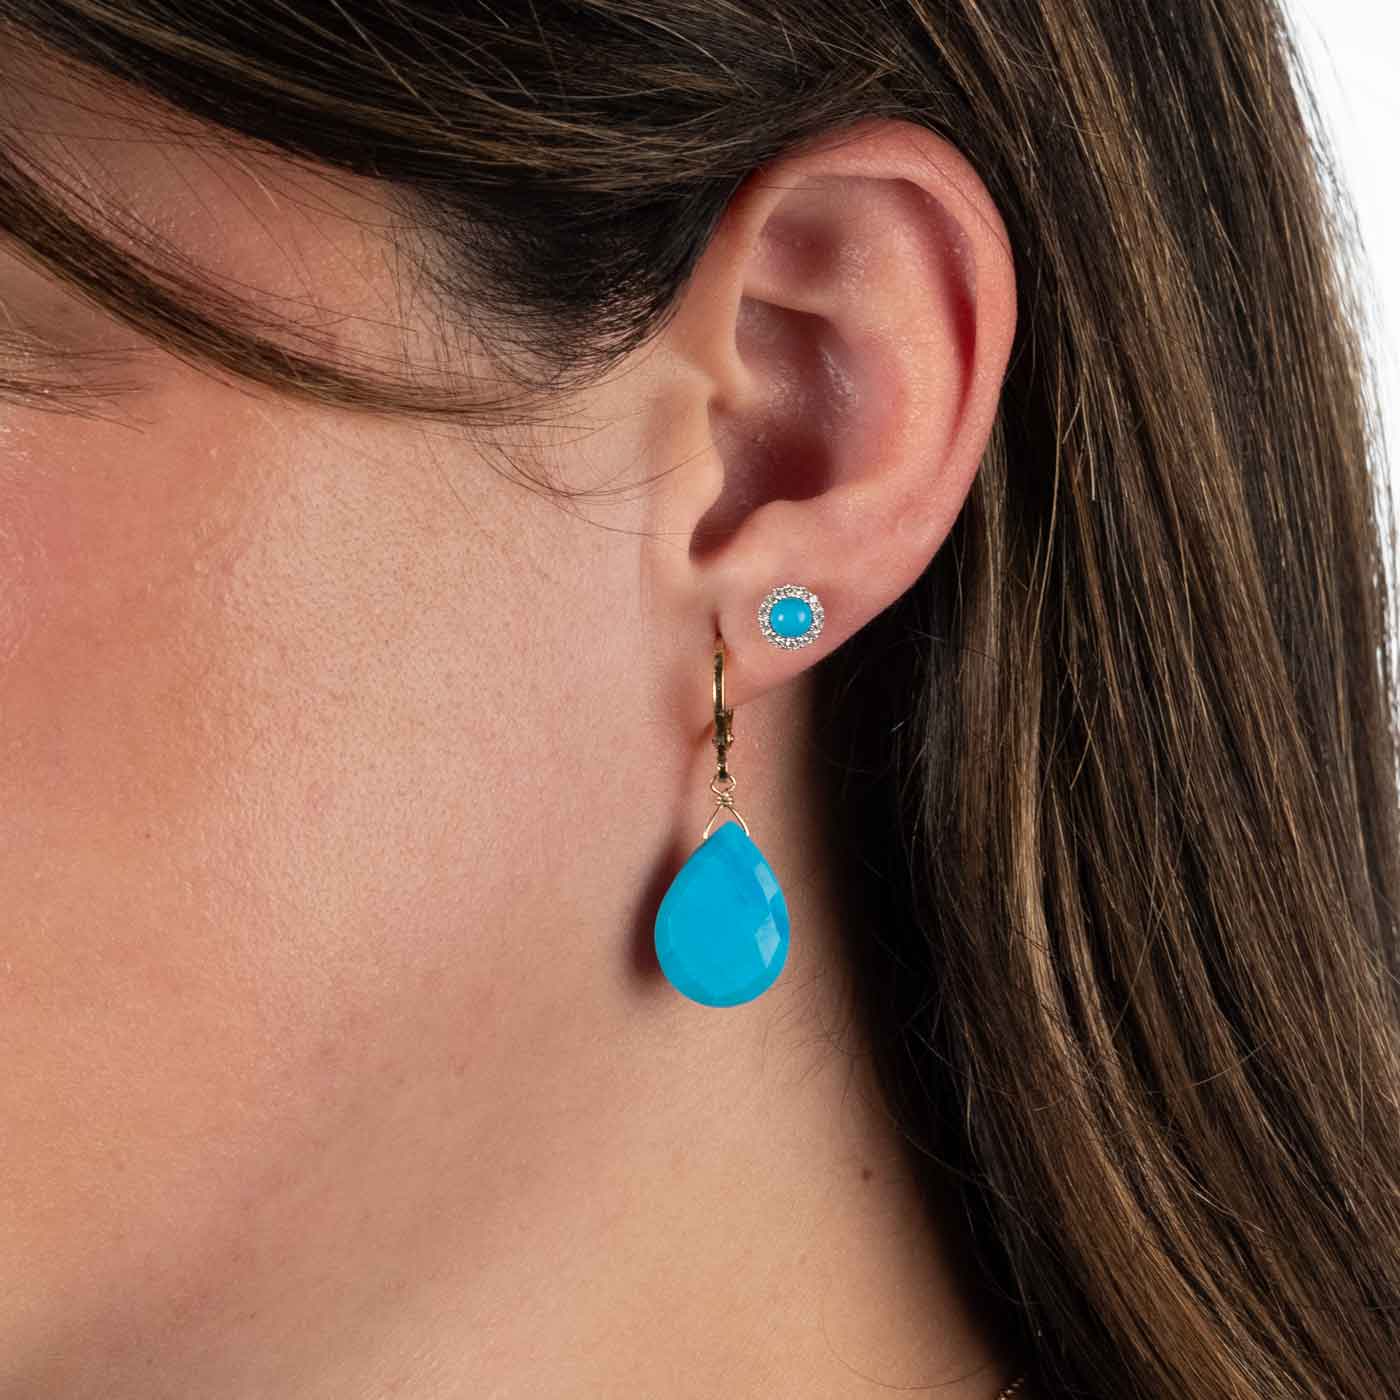 Van Der Hout Jewelry 14k Gold Turquoise Trio Stud Earrings | Willowbrook  Shopping Centre